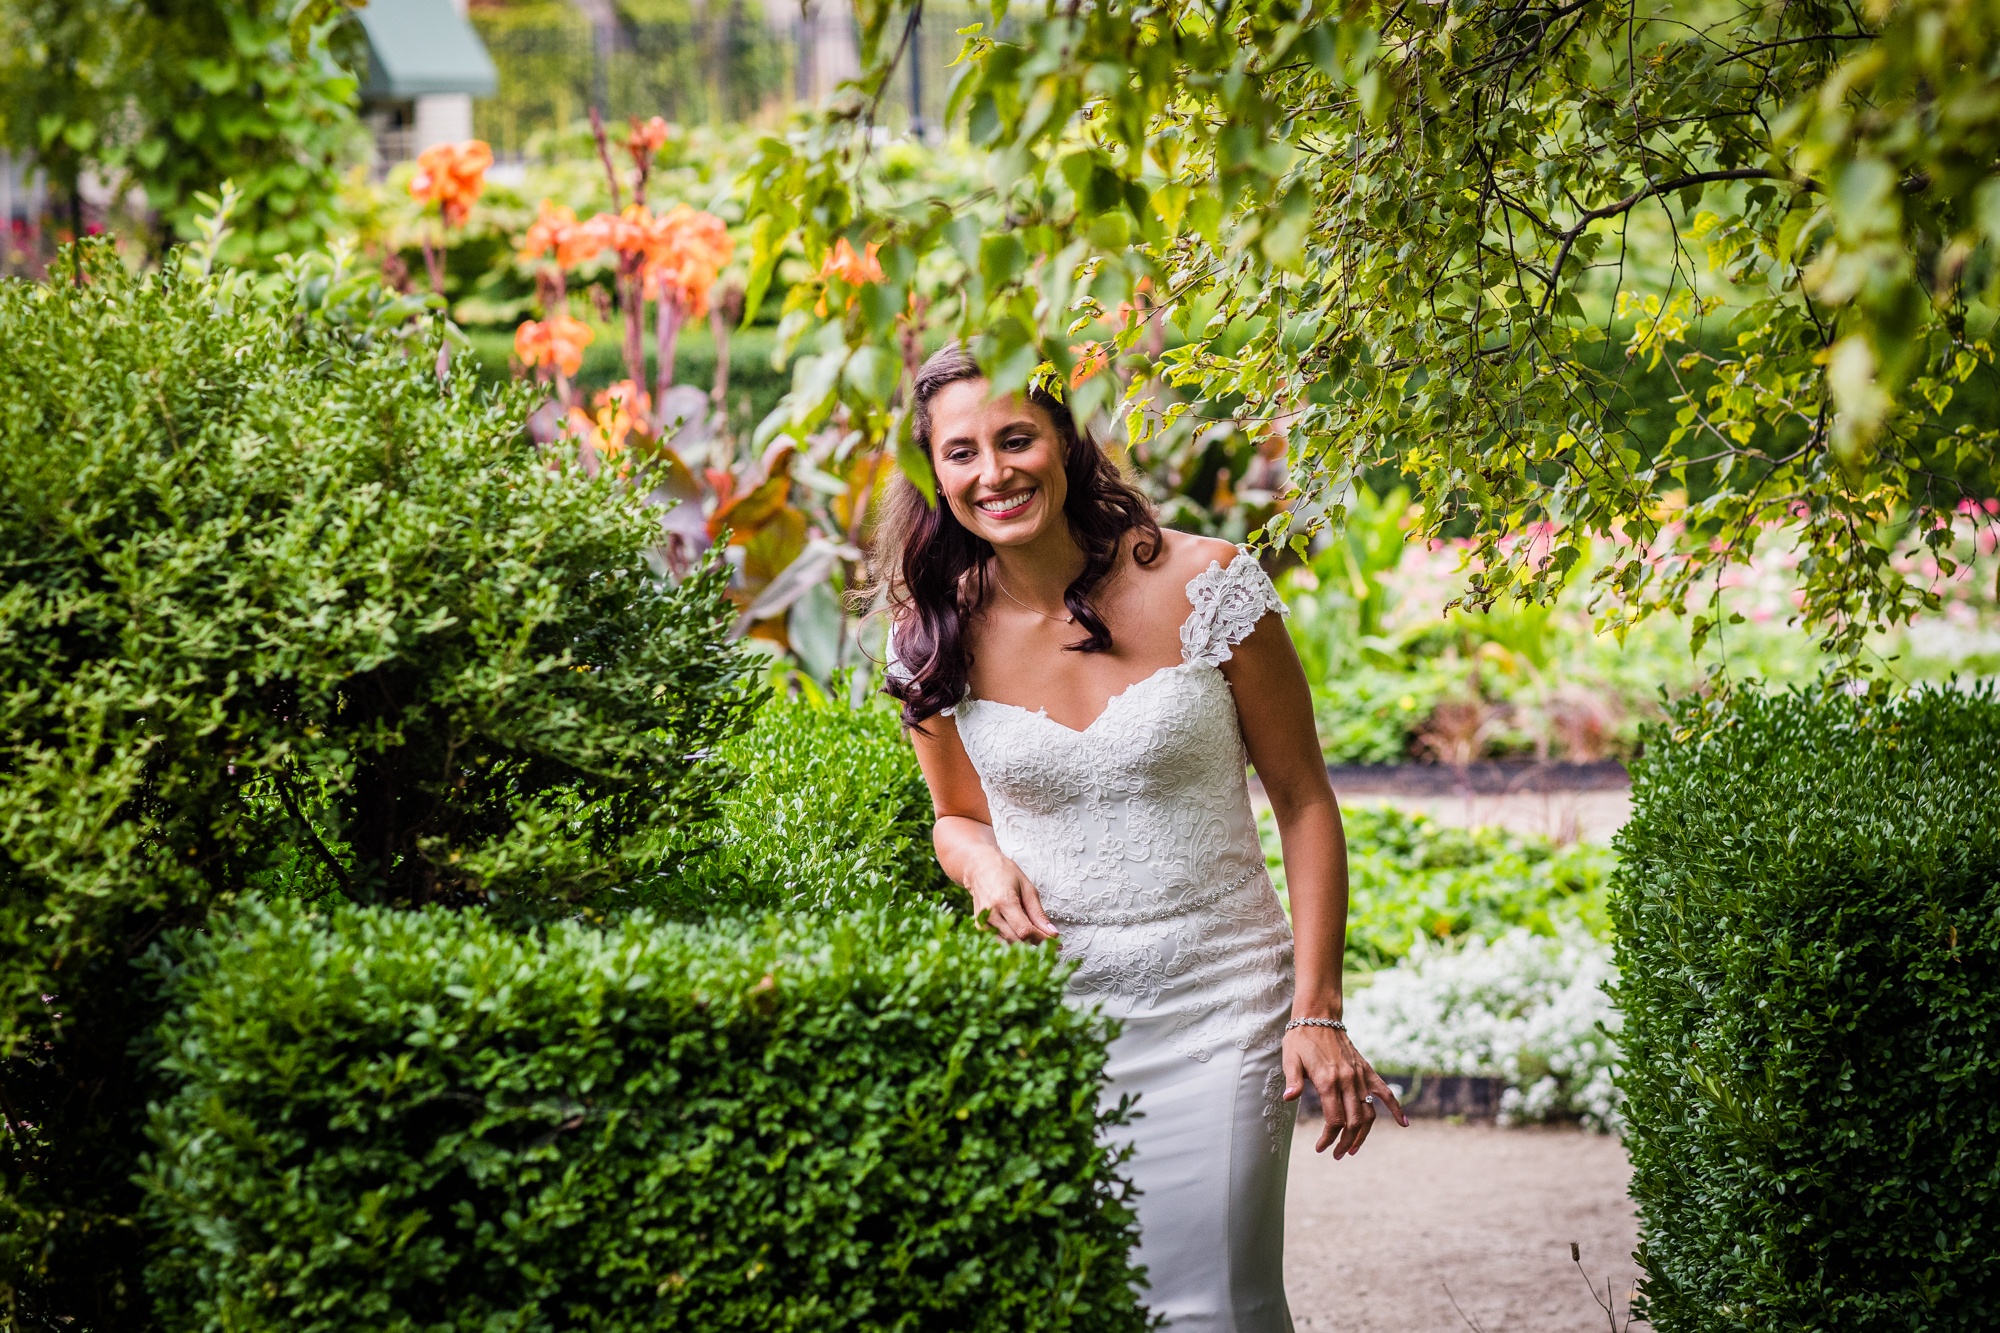 A bride walks to her first look with her groom at the Garfield Park Conservatory.